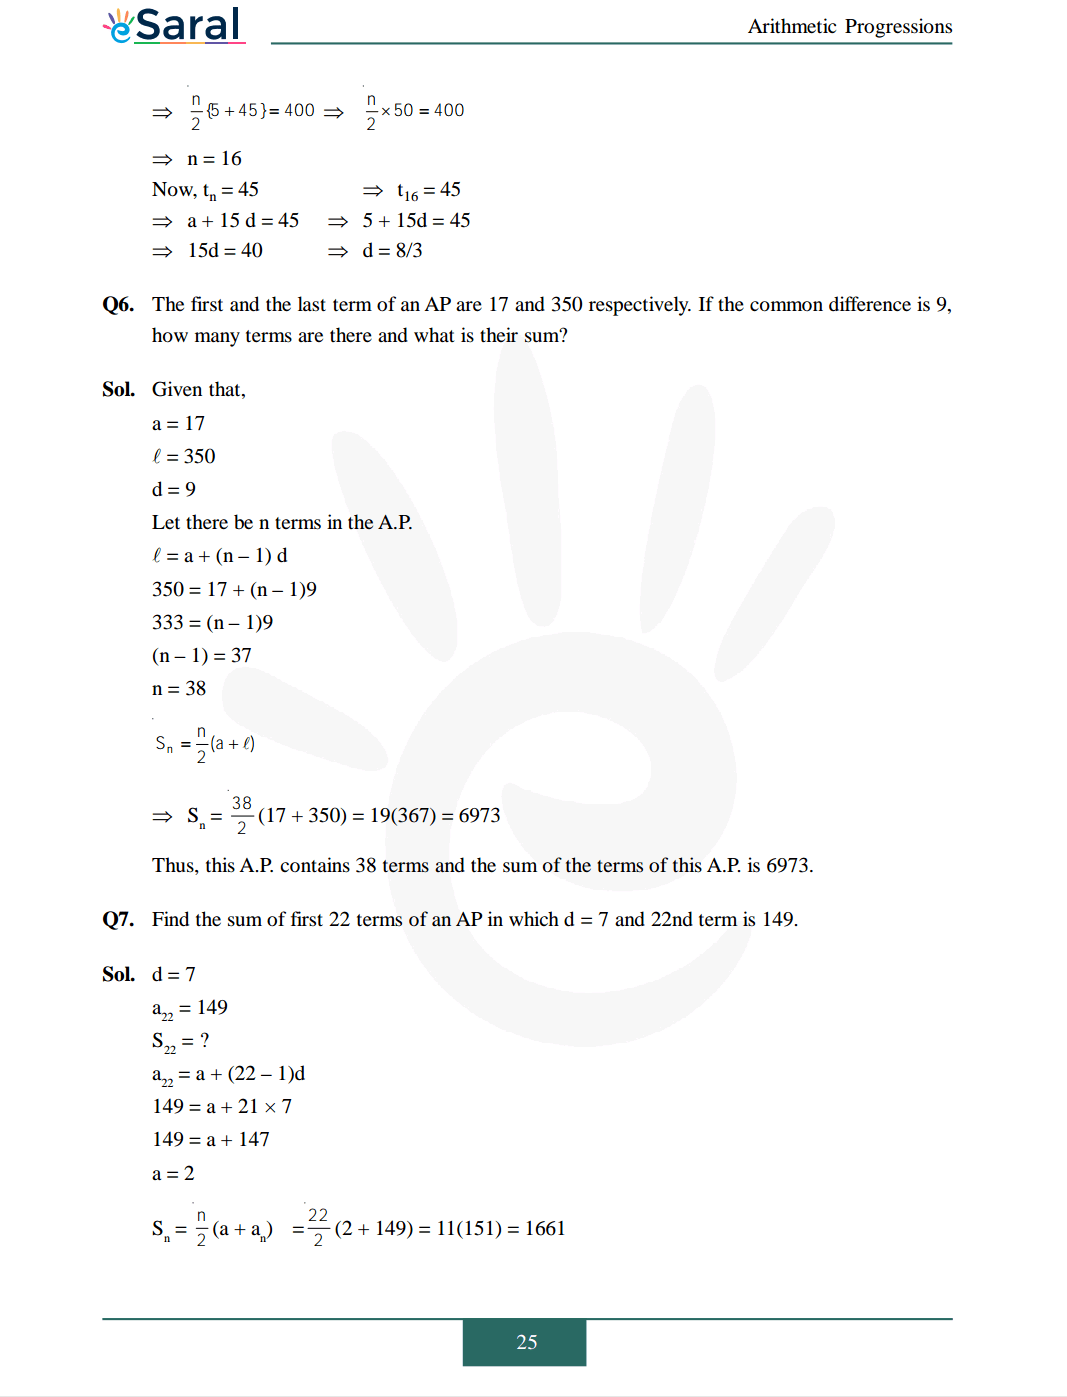 Class 10 Maths Chapter 5 exercise 5.3 solutions Image 8